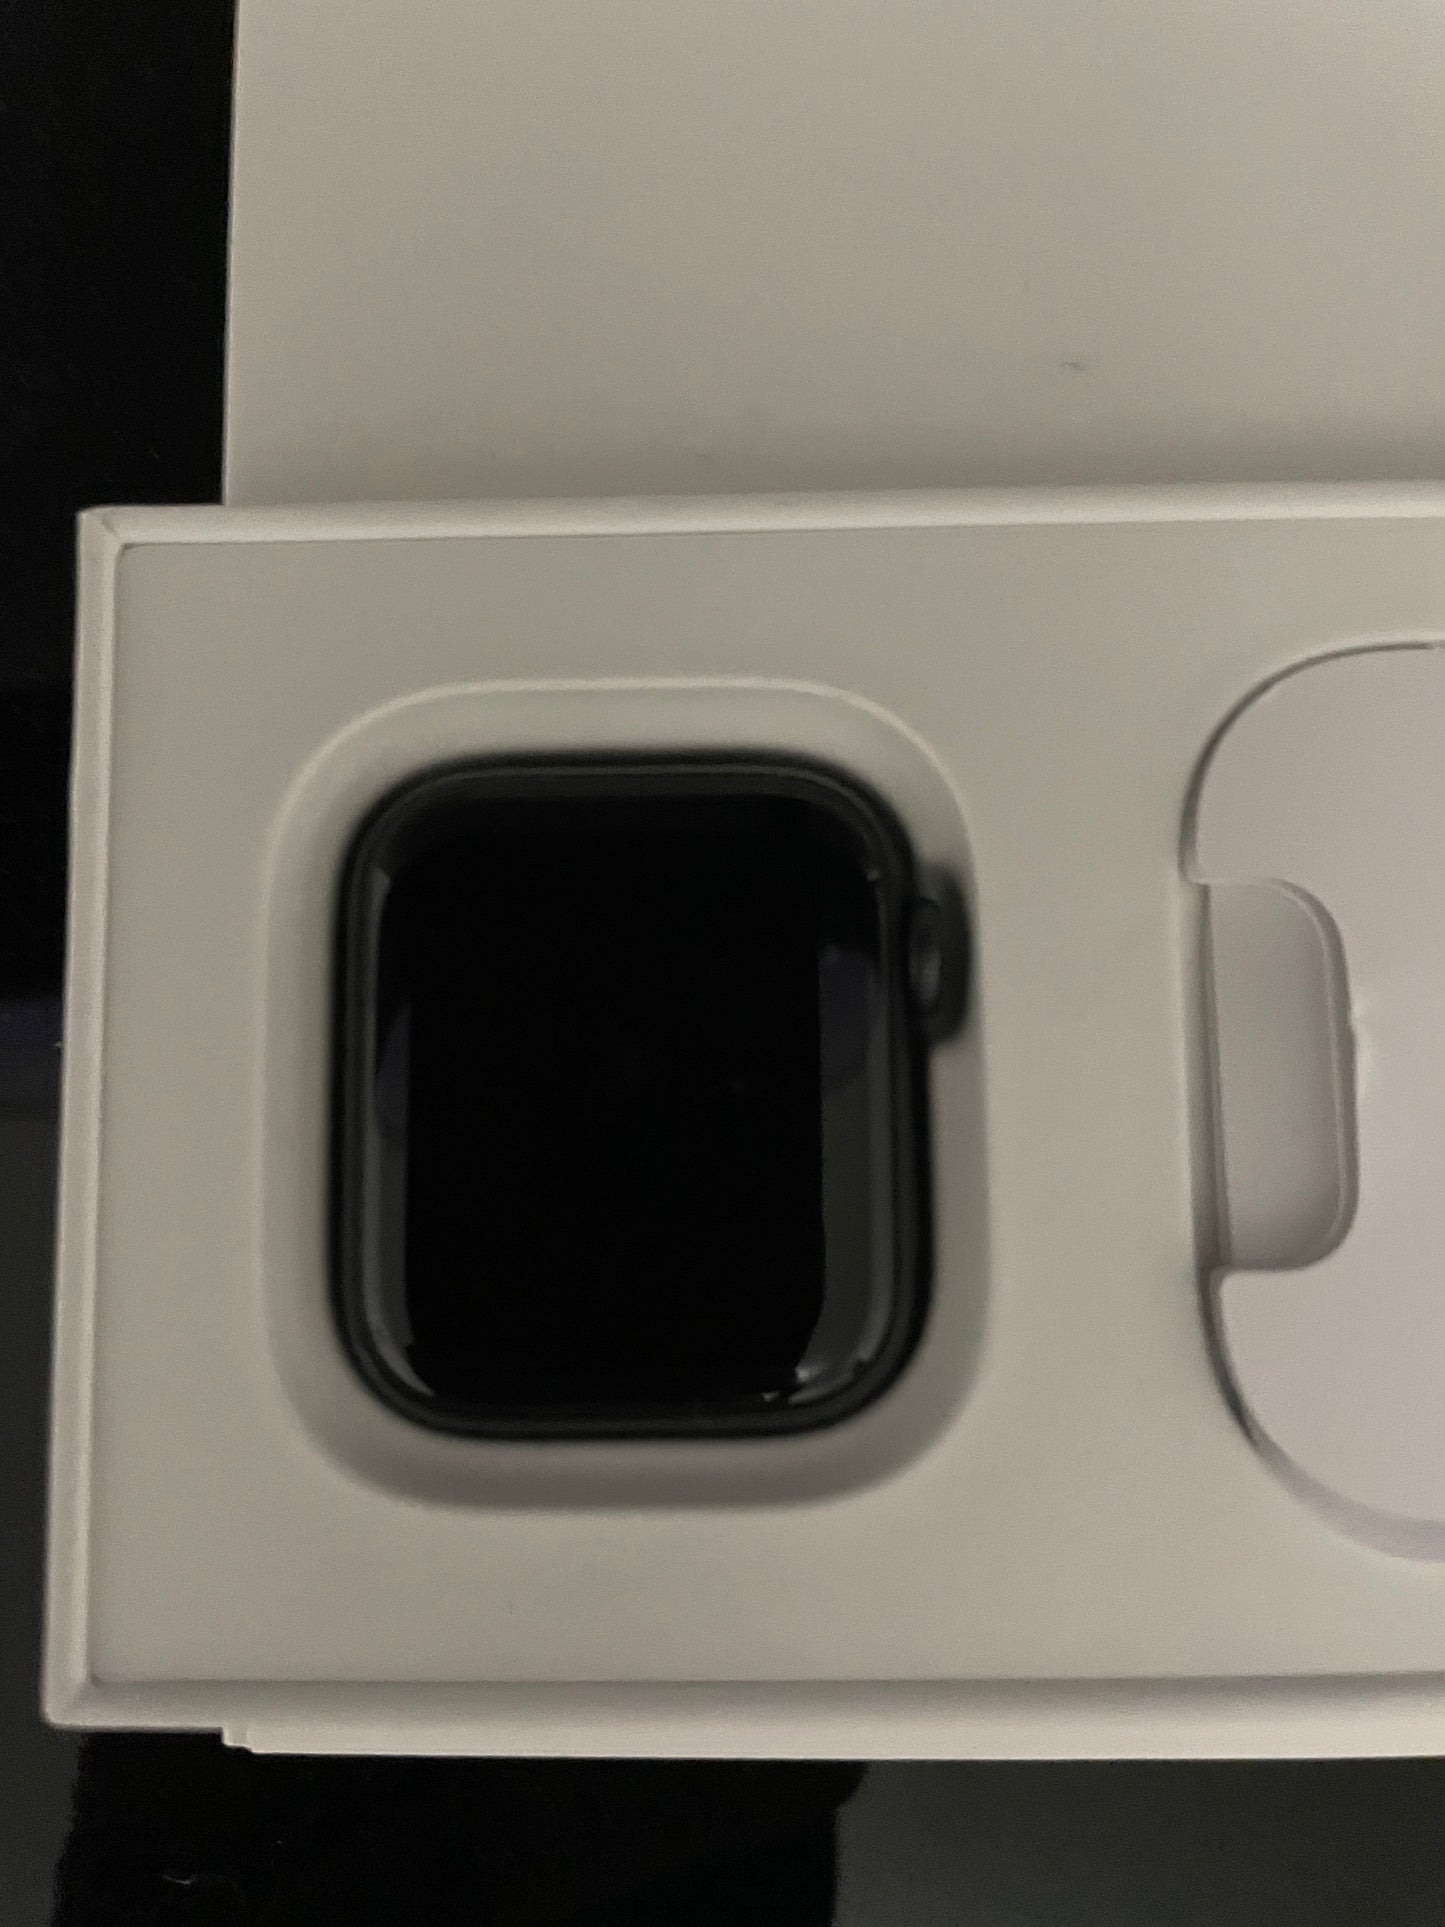 Apple Watch SE 40mm (Refurbished) Space Grey GPS.  Amazing Condition 9/10 Unlocked Ready to Connect! Comes with Apple Watch Band & Charger!